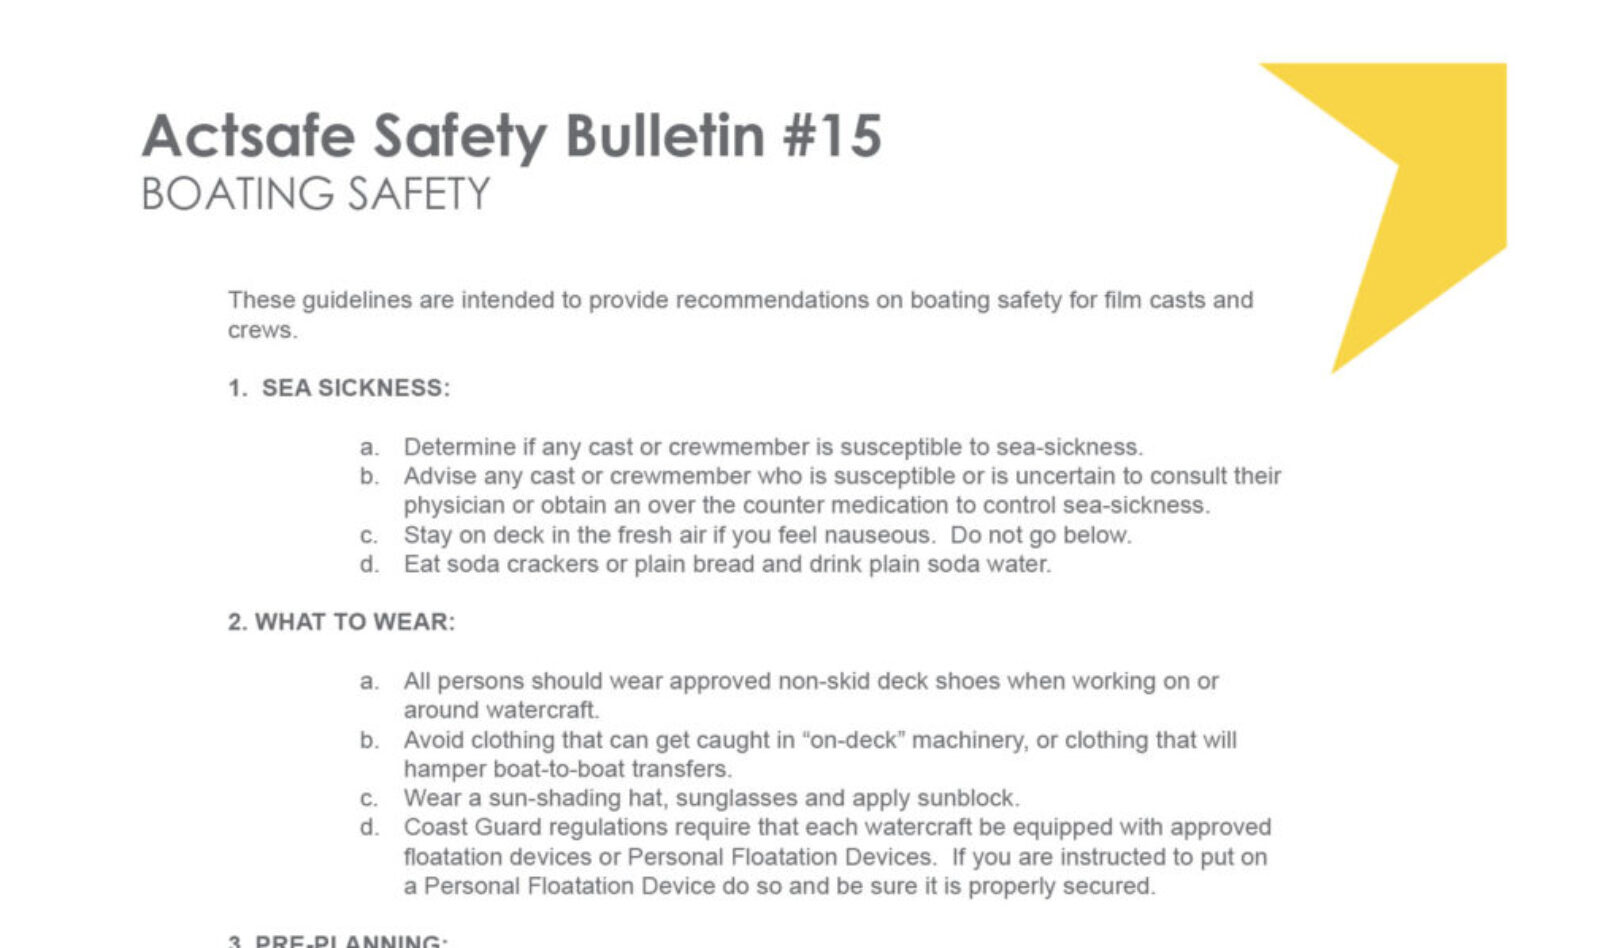 #15 Boating Safety Motion Picture Safety Bulletin